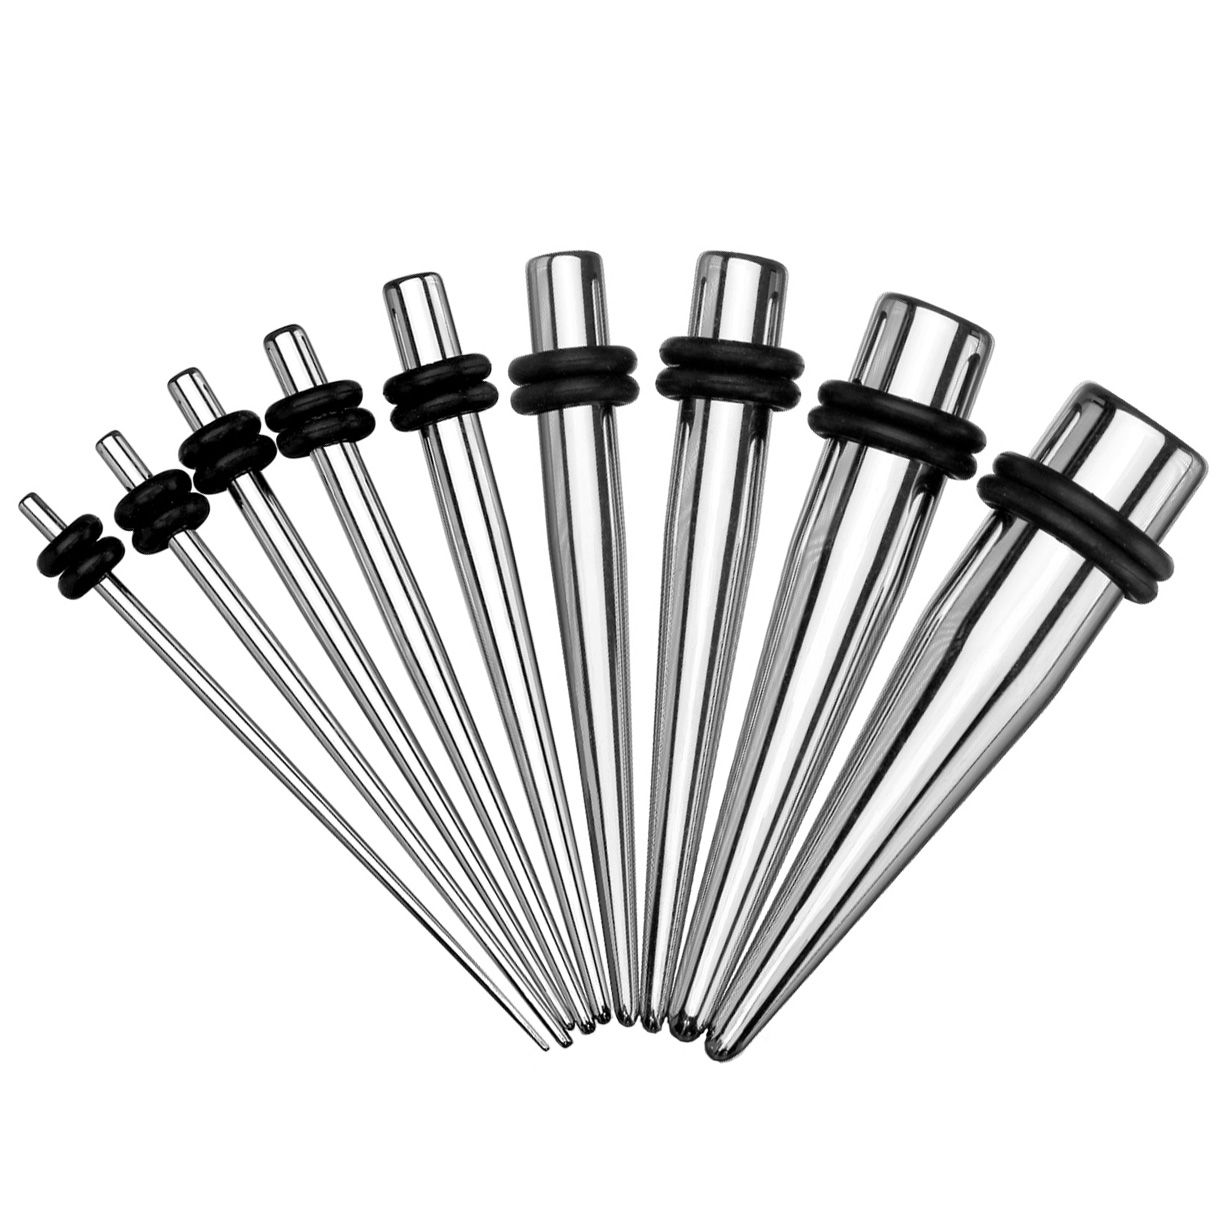 Tapers set in surgical steel